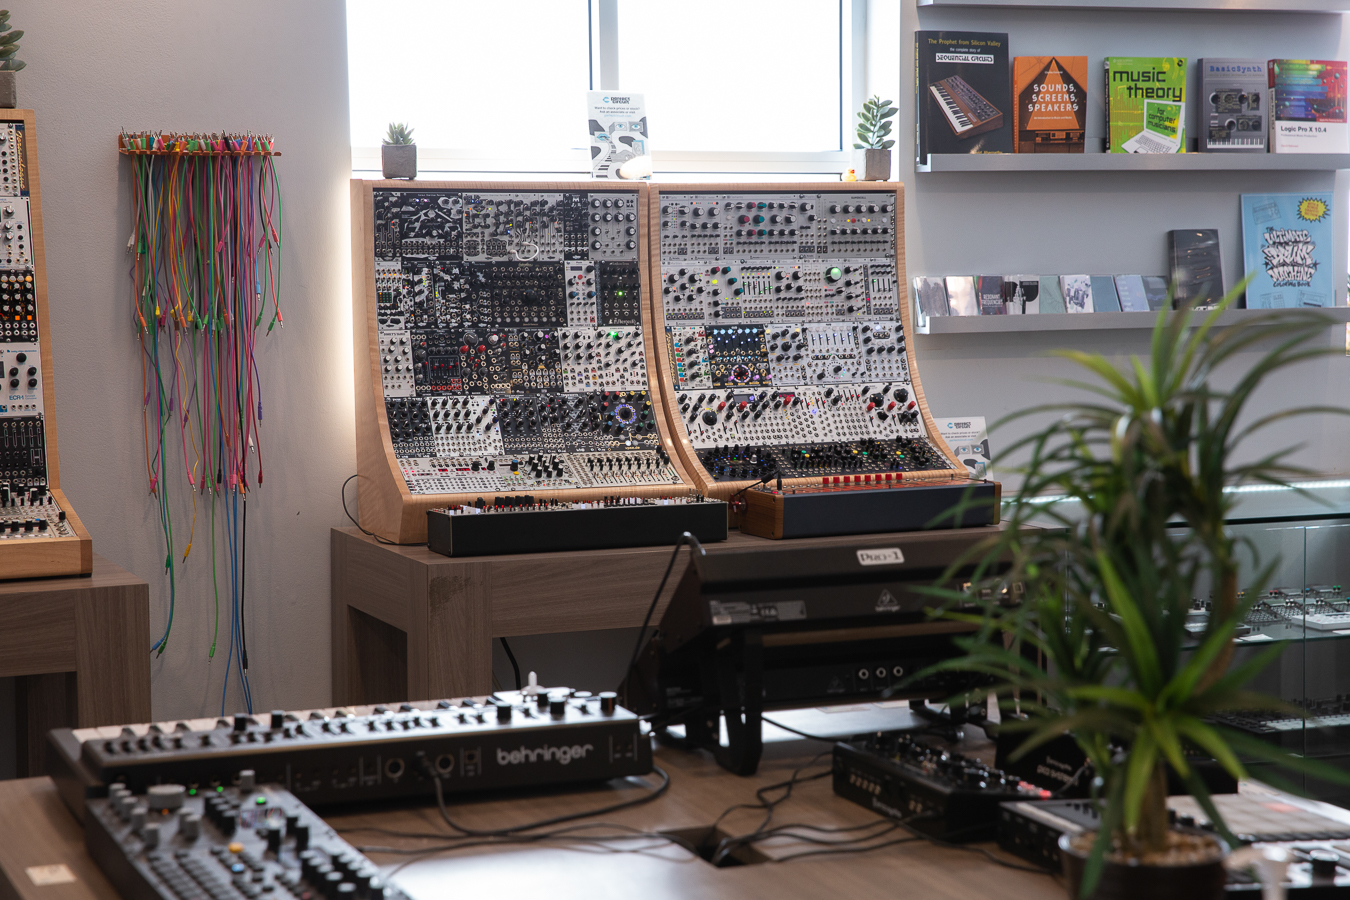 A large Eurorack modular synthesizer system in the Perfect Circuit showroom in Burbank, California.